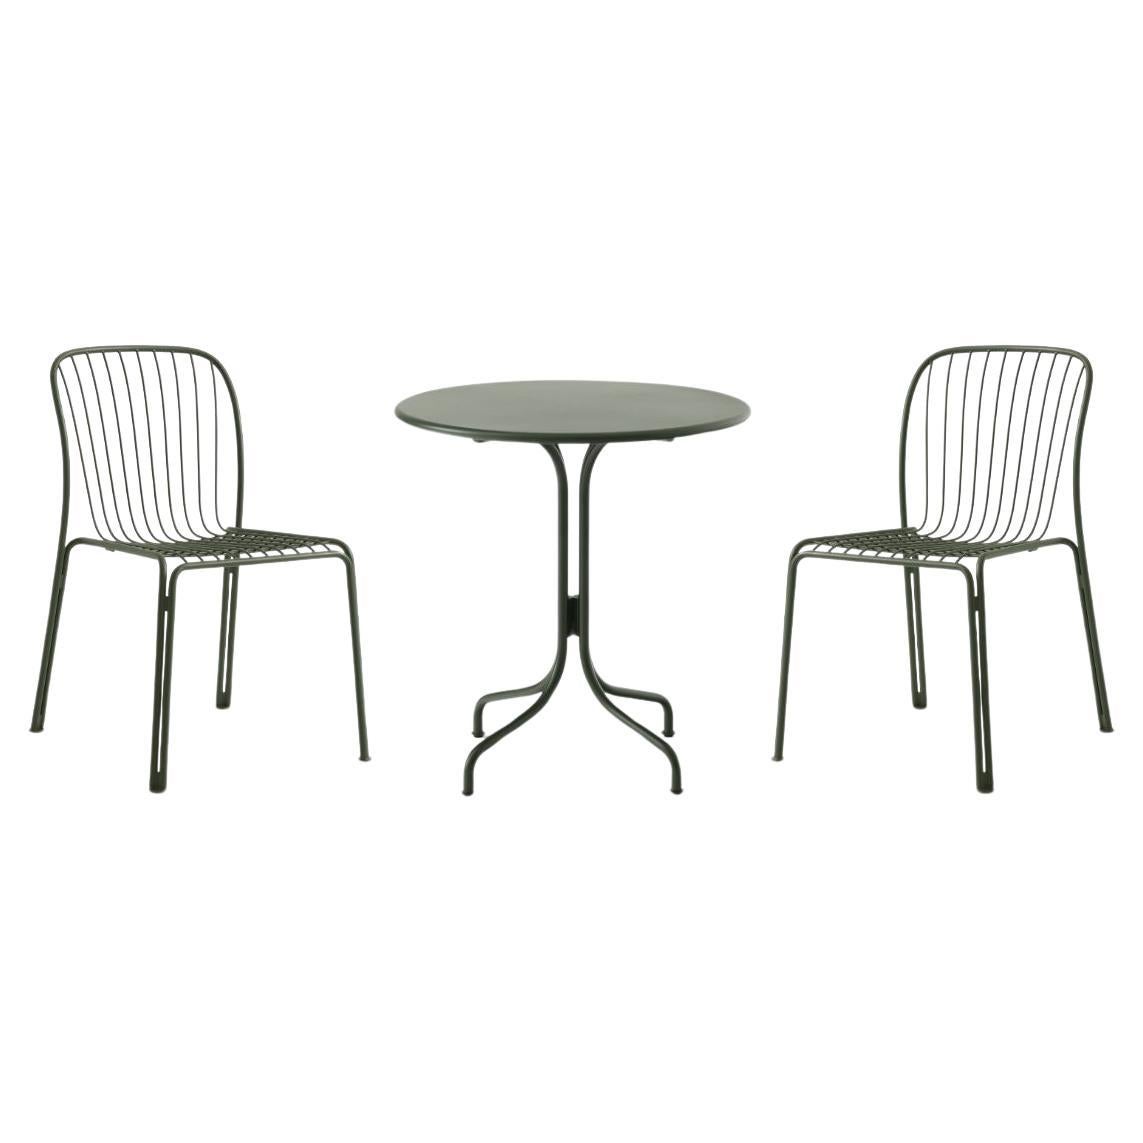 Set of Thorvald Outdoor Side Chairs/Table-BronzeGreen-by Space Copenhagen for &T For Sale